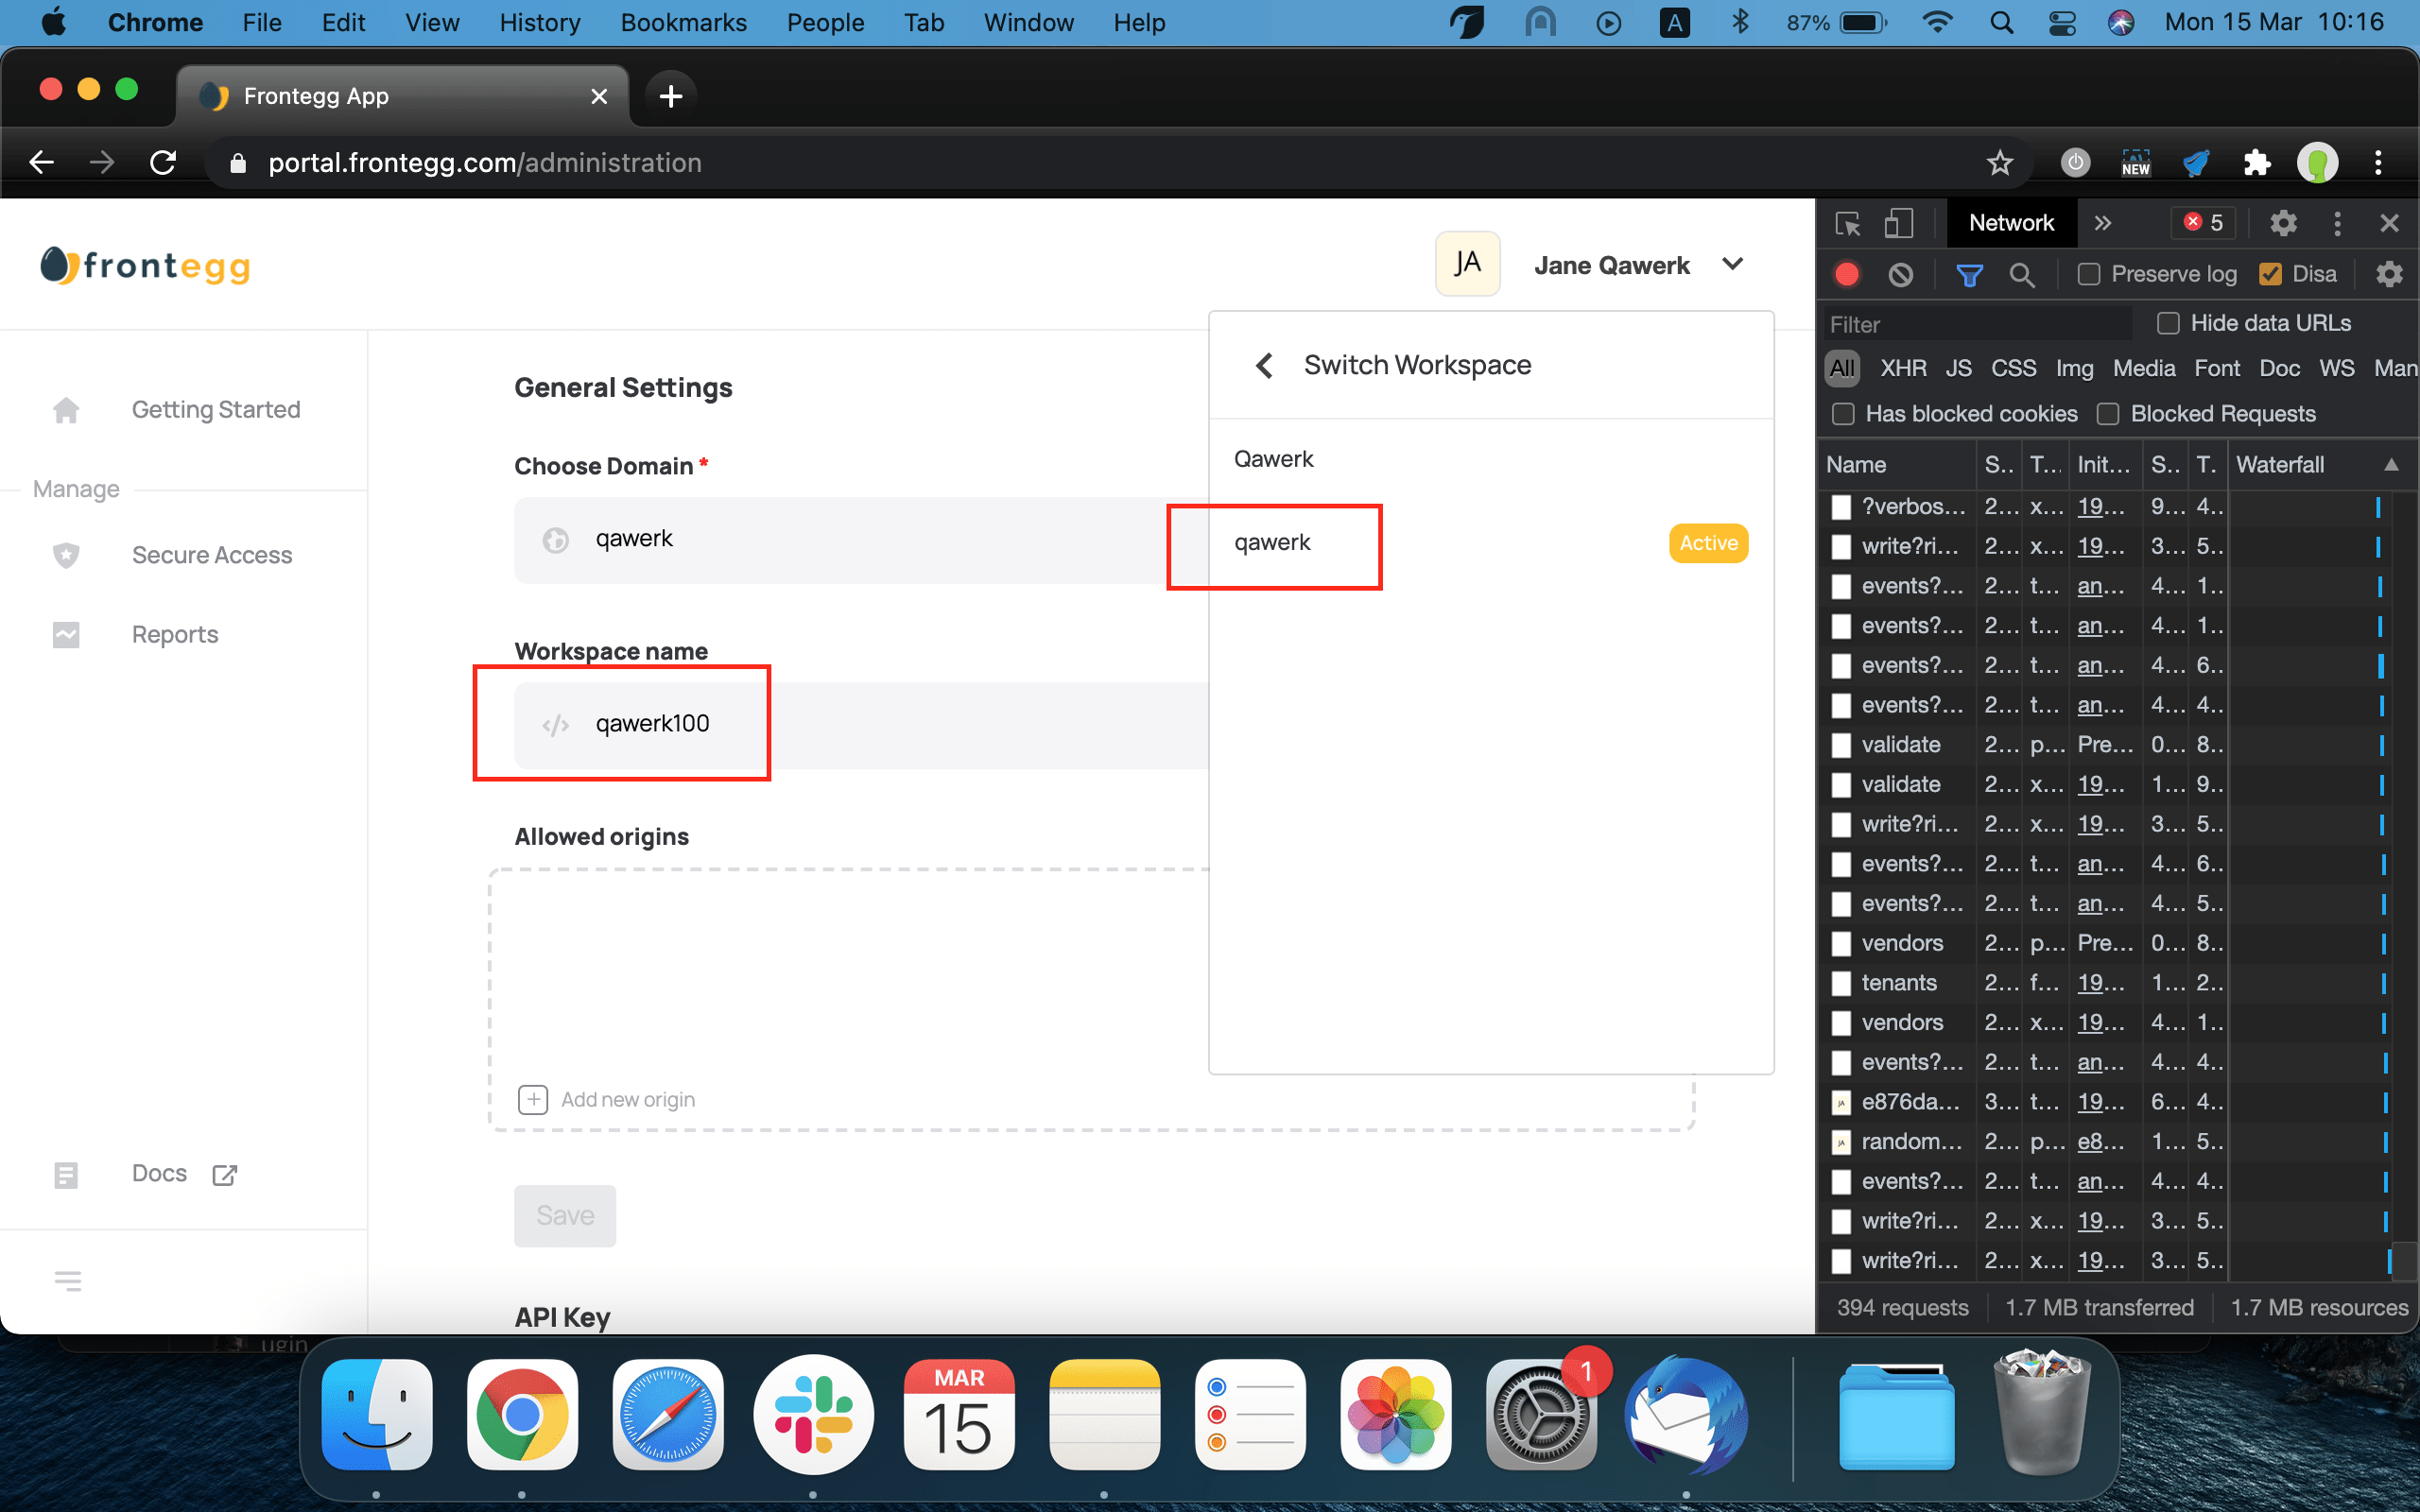 Workspace in the user menu is not renamed right after it has been edited in Settings